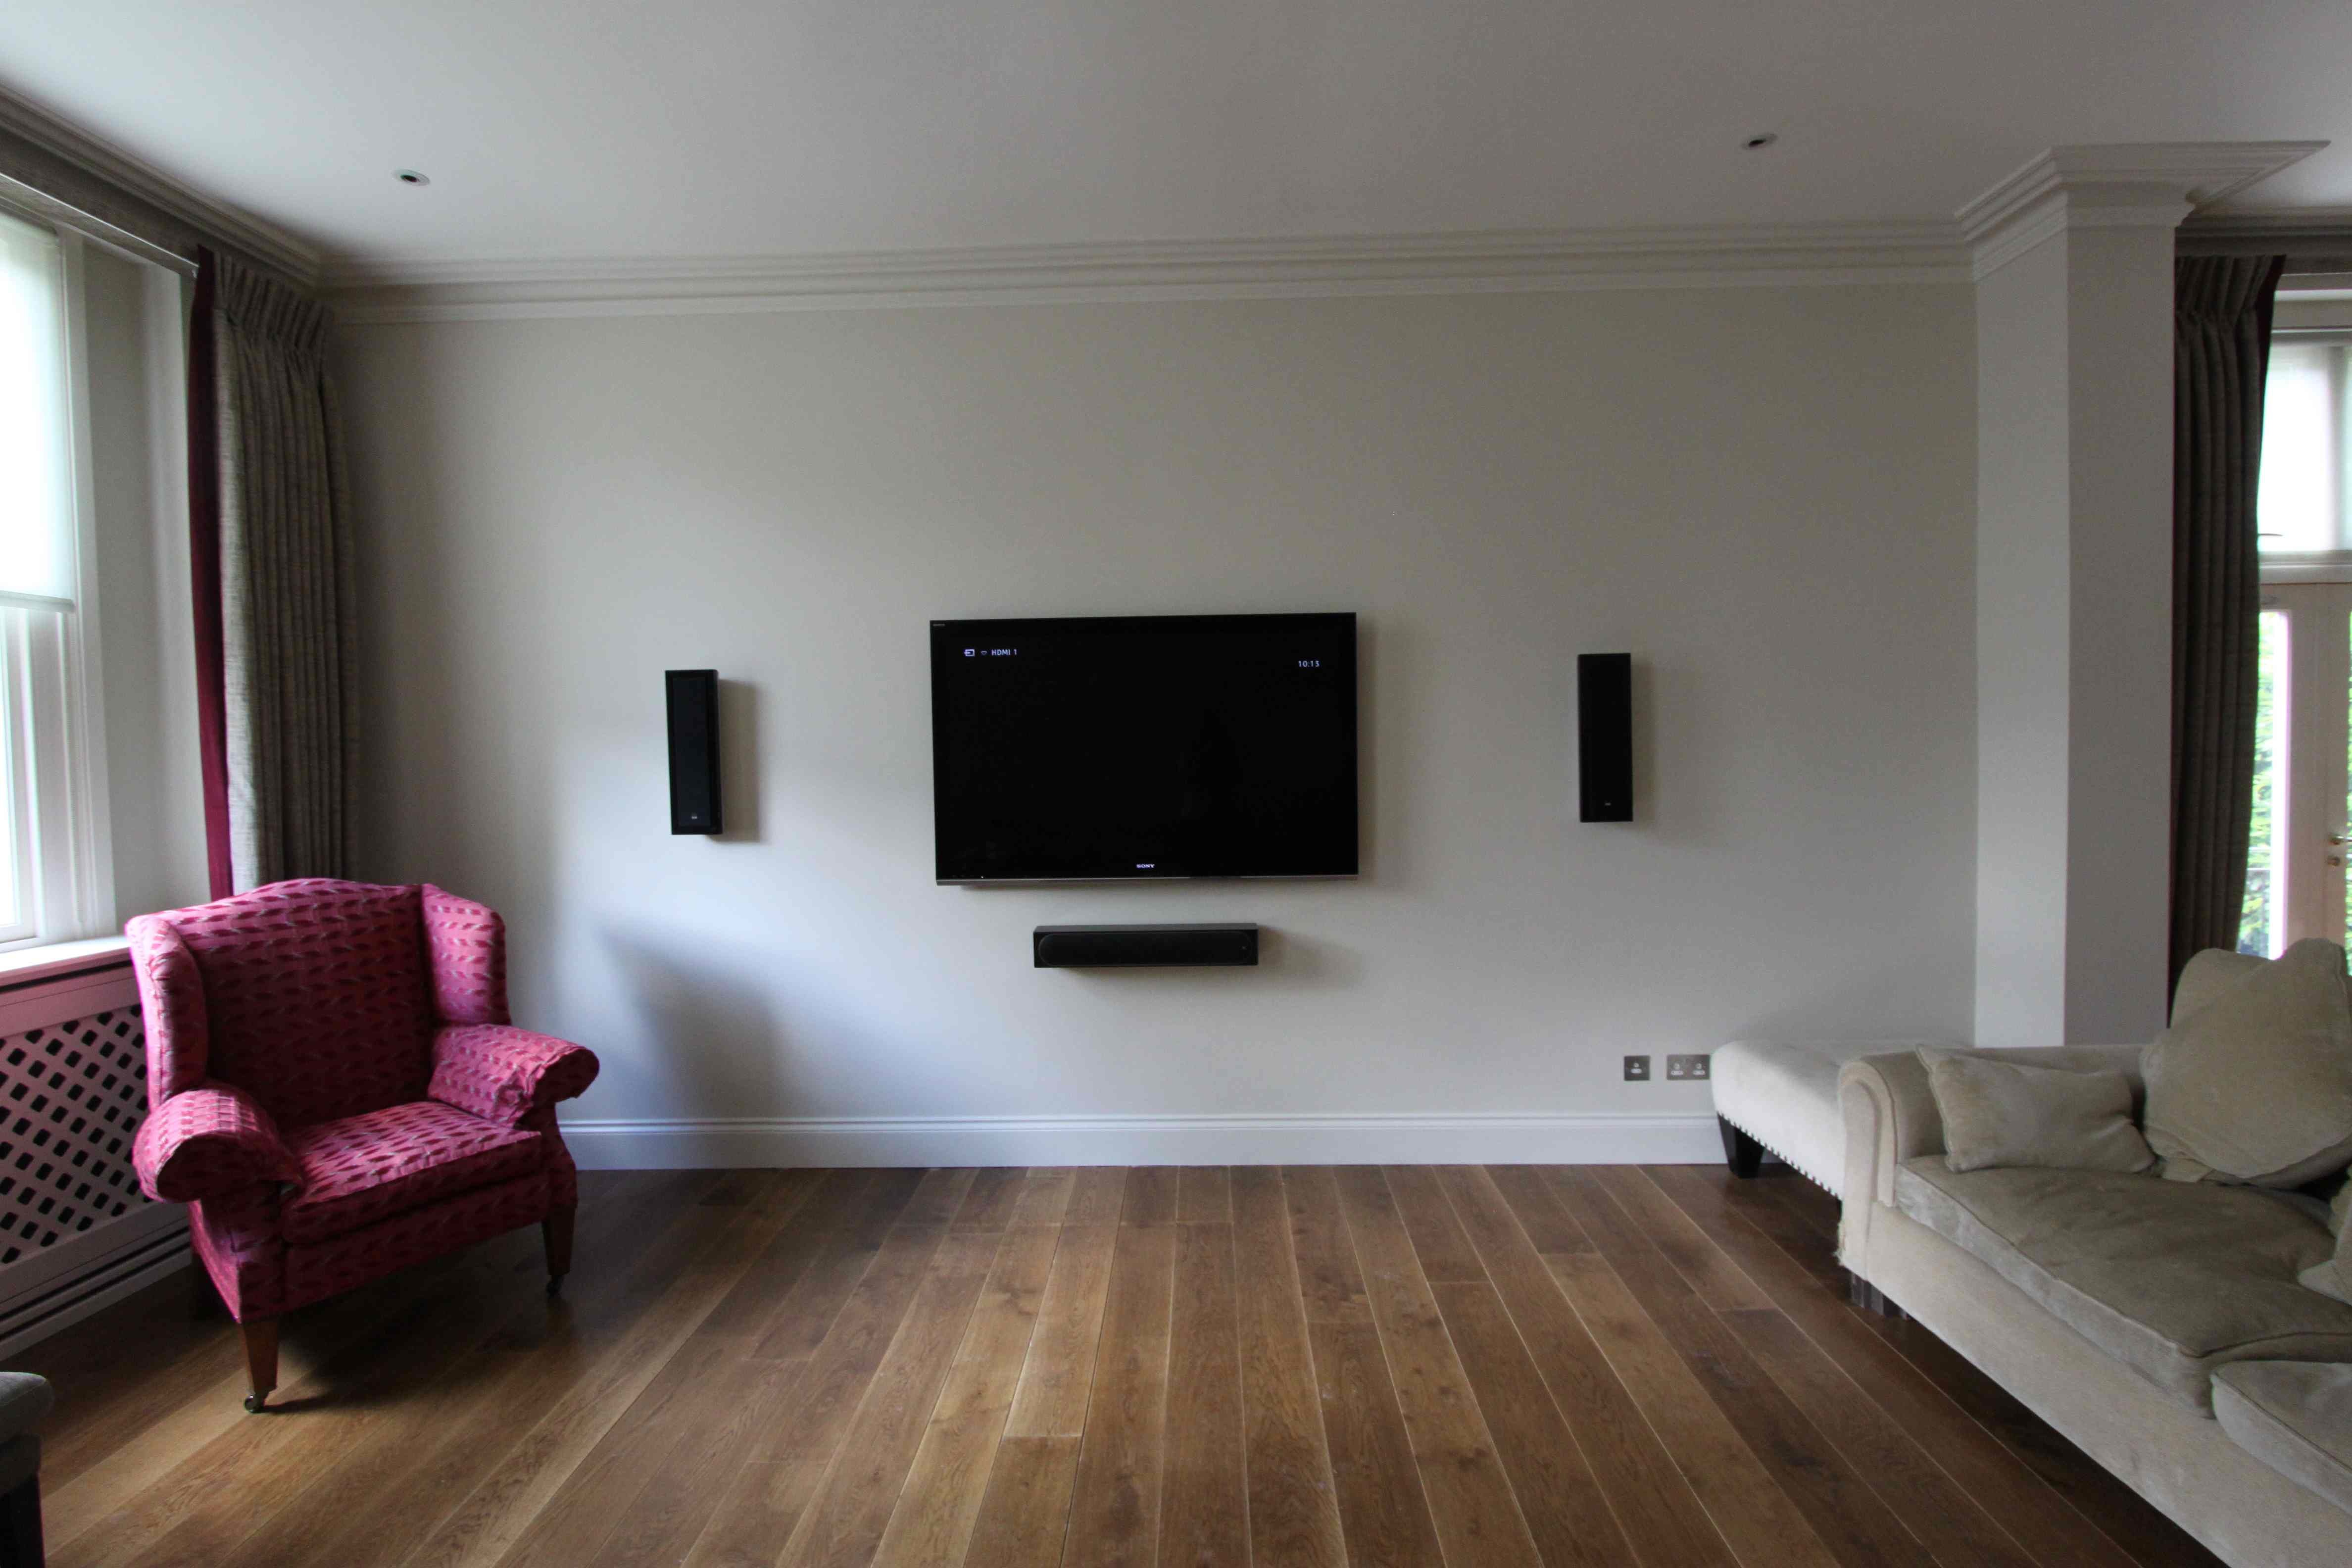 wall mounted surround sound speakers